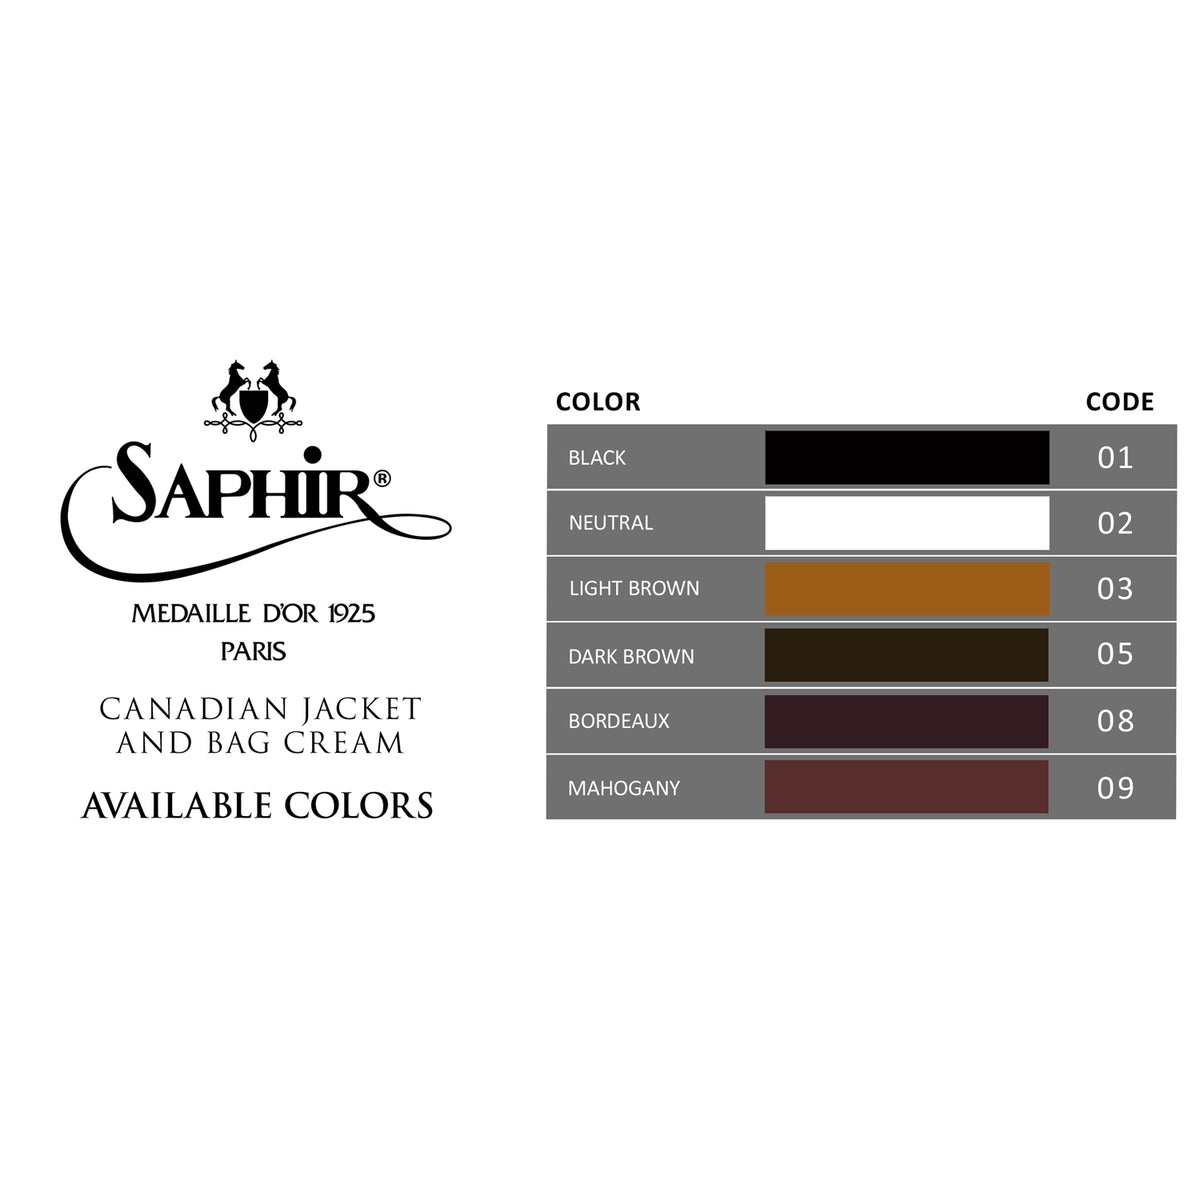 KirbyAllison.com's Saphir Canadian Jacket & Bag Cream and color chart for leather luggage.